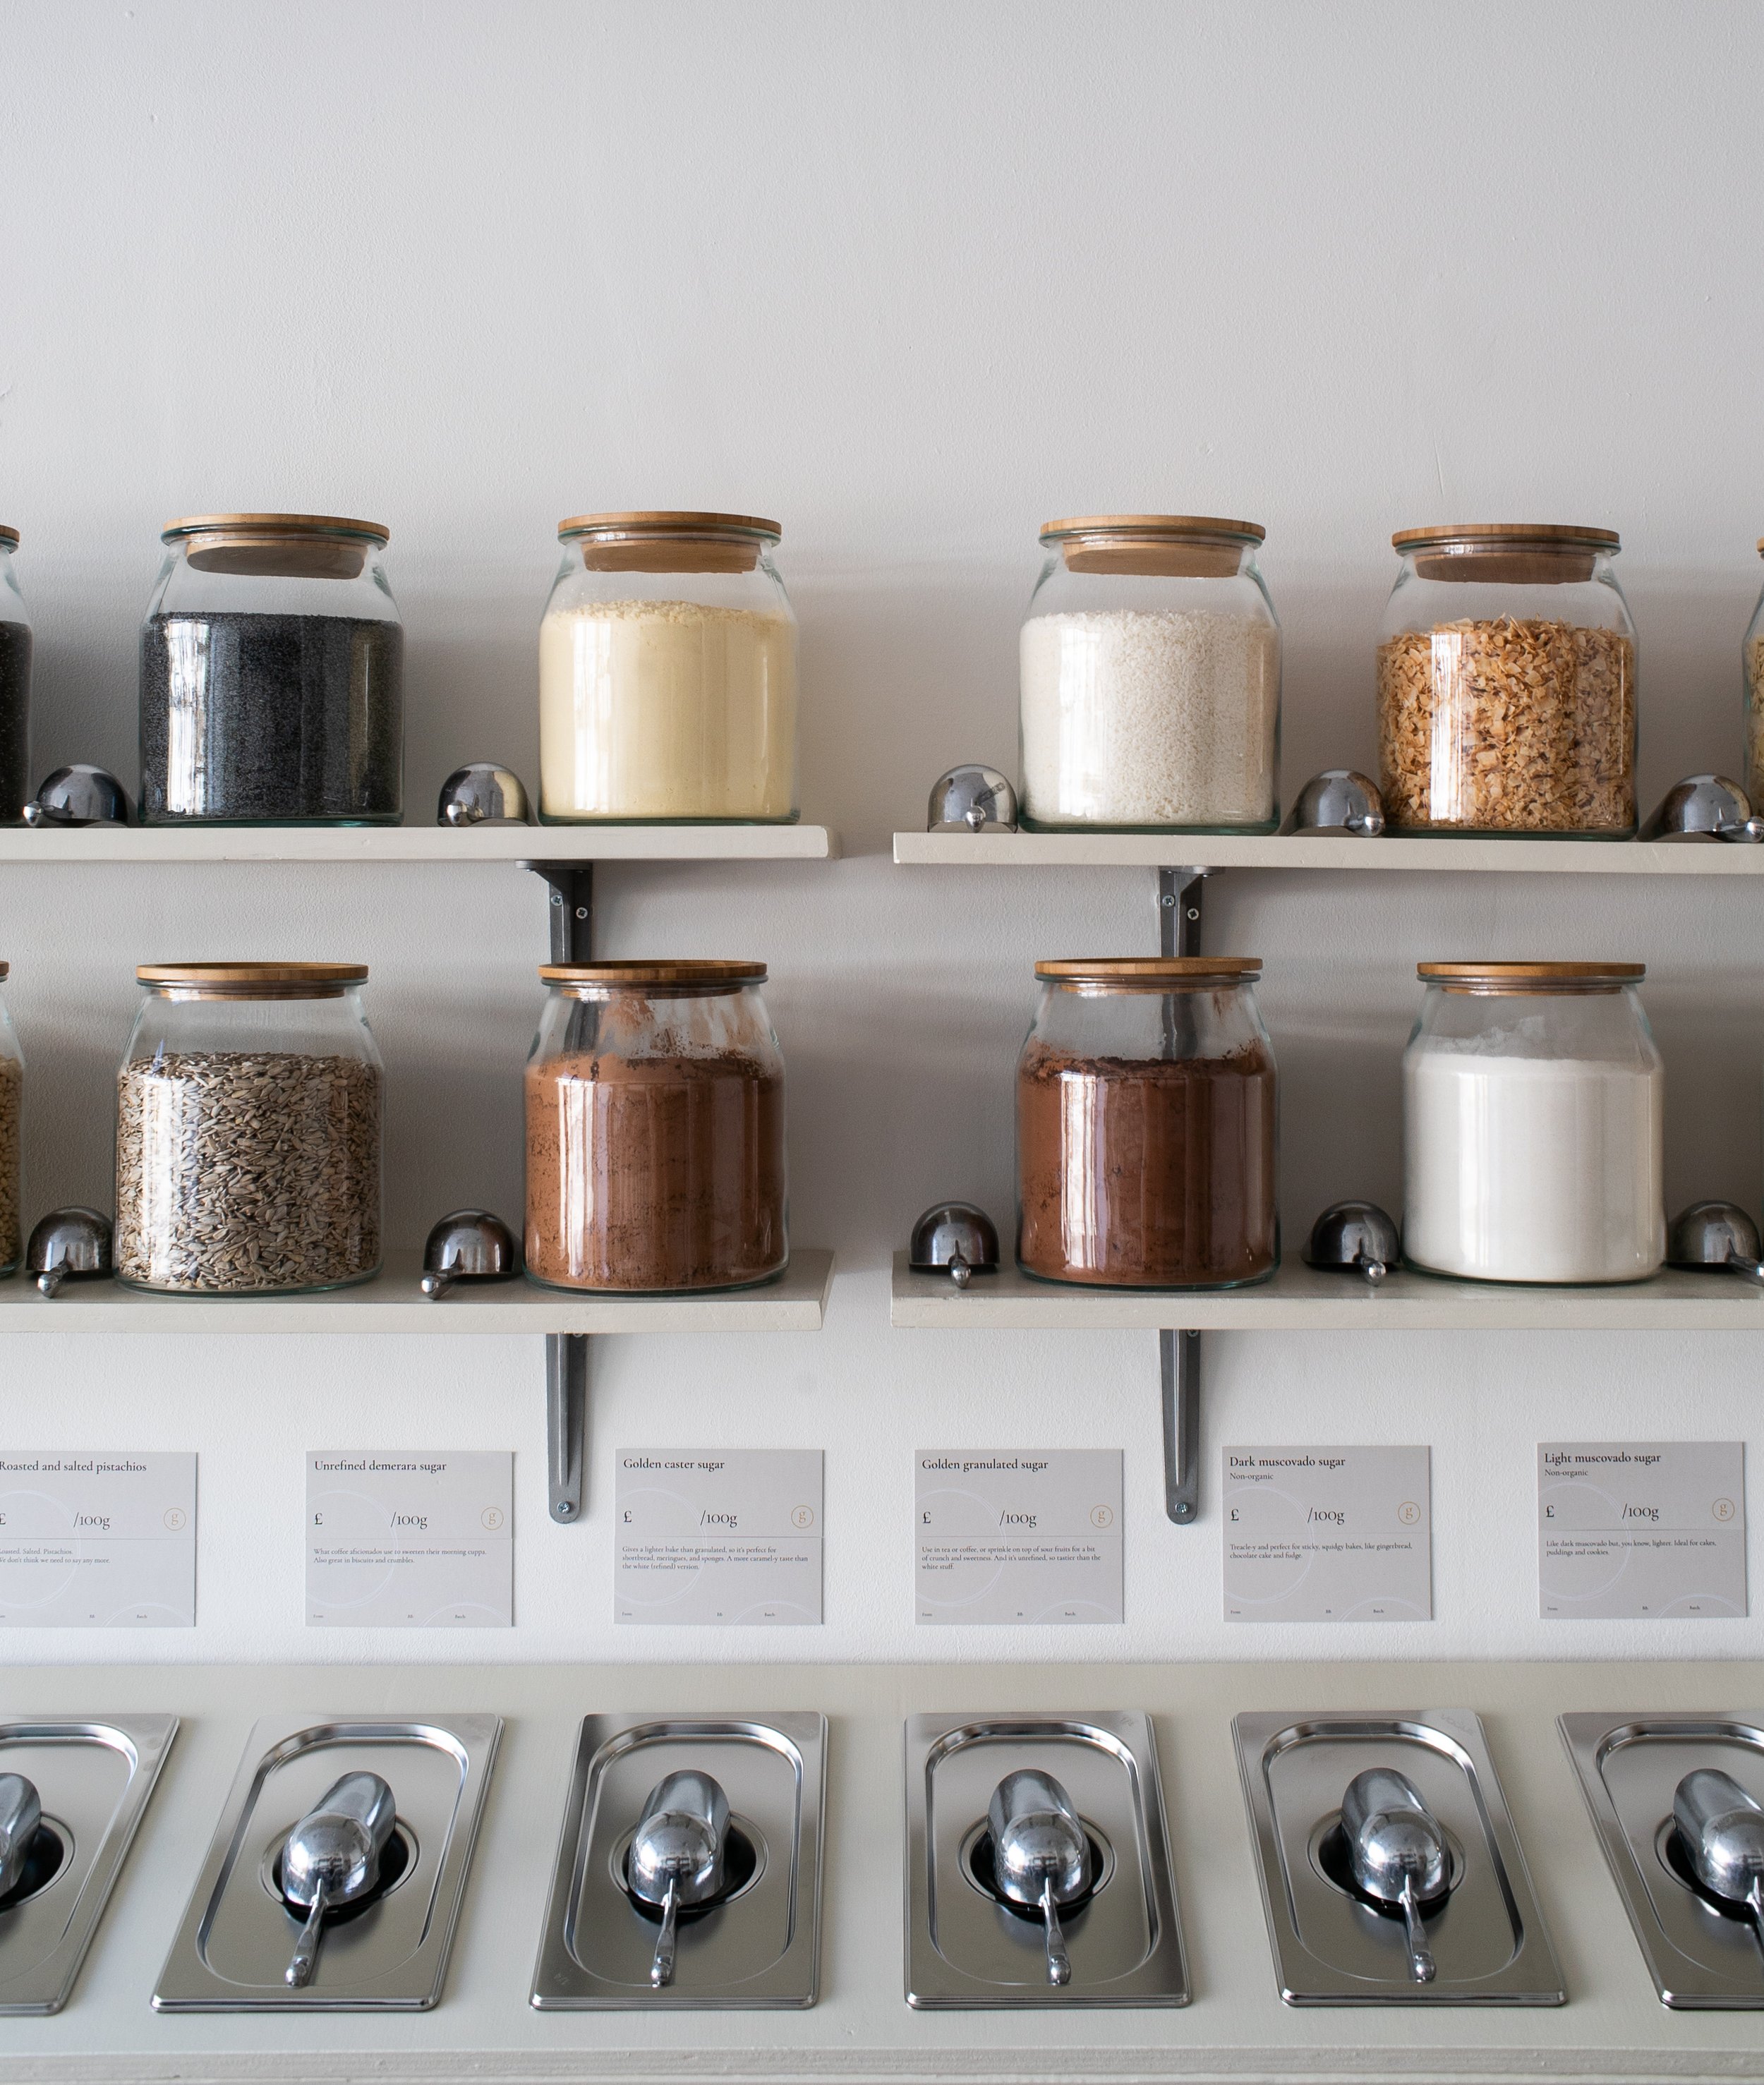 Food jars displayed in Gather, a zero waste store in London